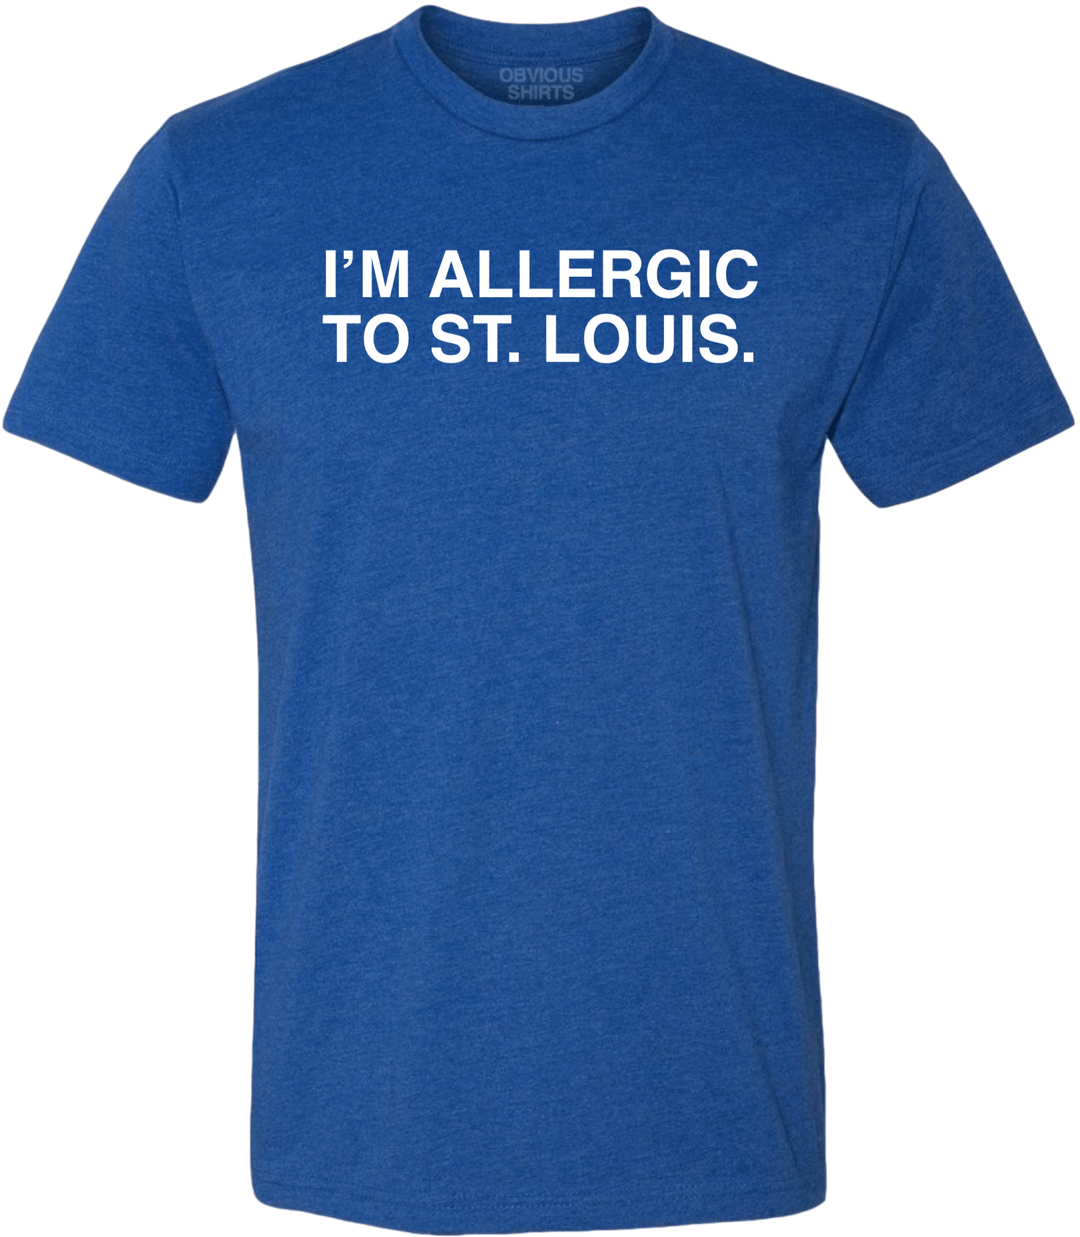 I'M ALLERGIC TO ST. LOUIS. - OBVIOUS SHIRTS.